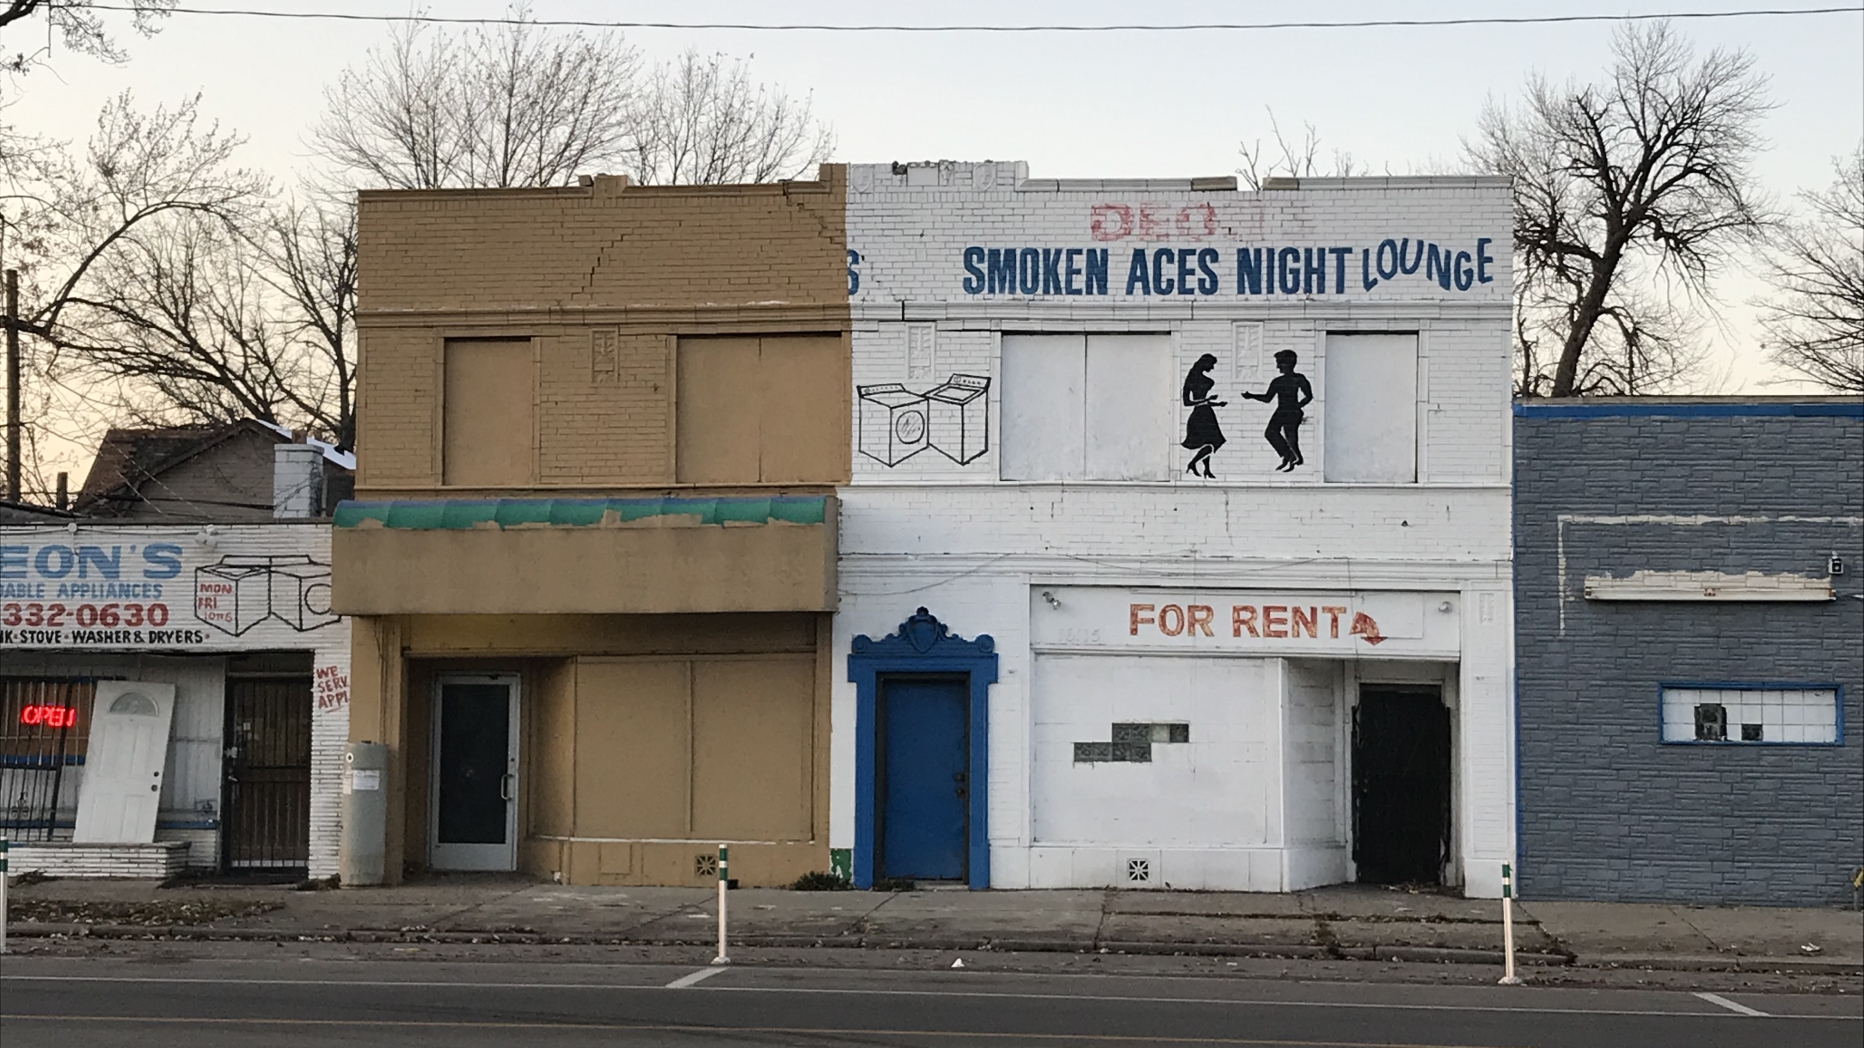  Row of abandoned storefront. One has sign that says "Smokin Aces Dance Hall" and another that says "For Rent"